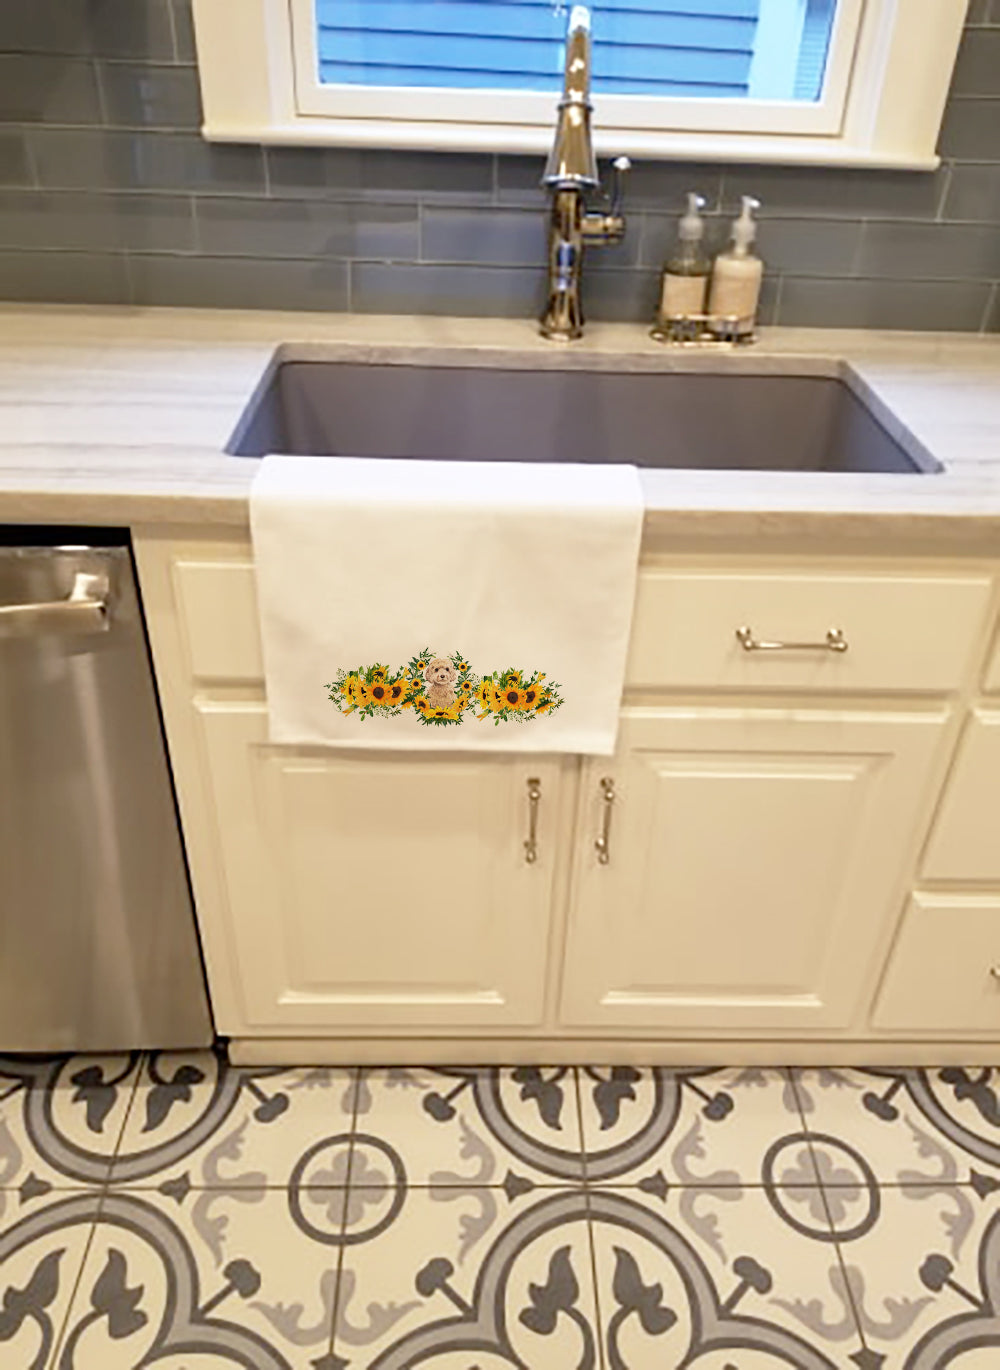 Buy this Champagne Cockapoo in Sunflowers White Kitchen Towel Set of 2